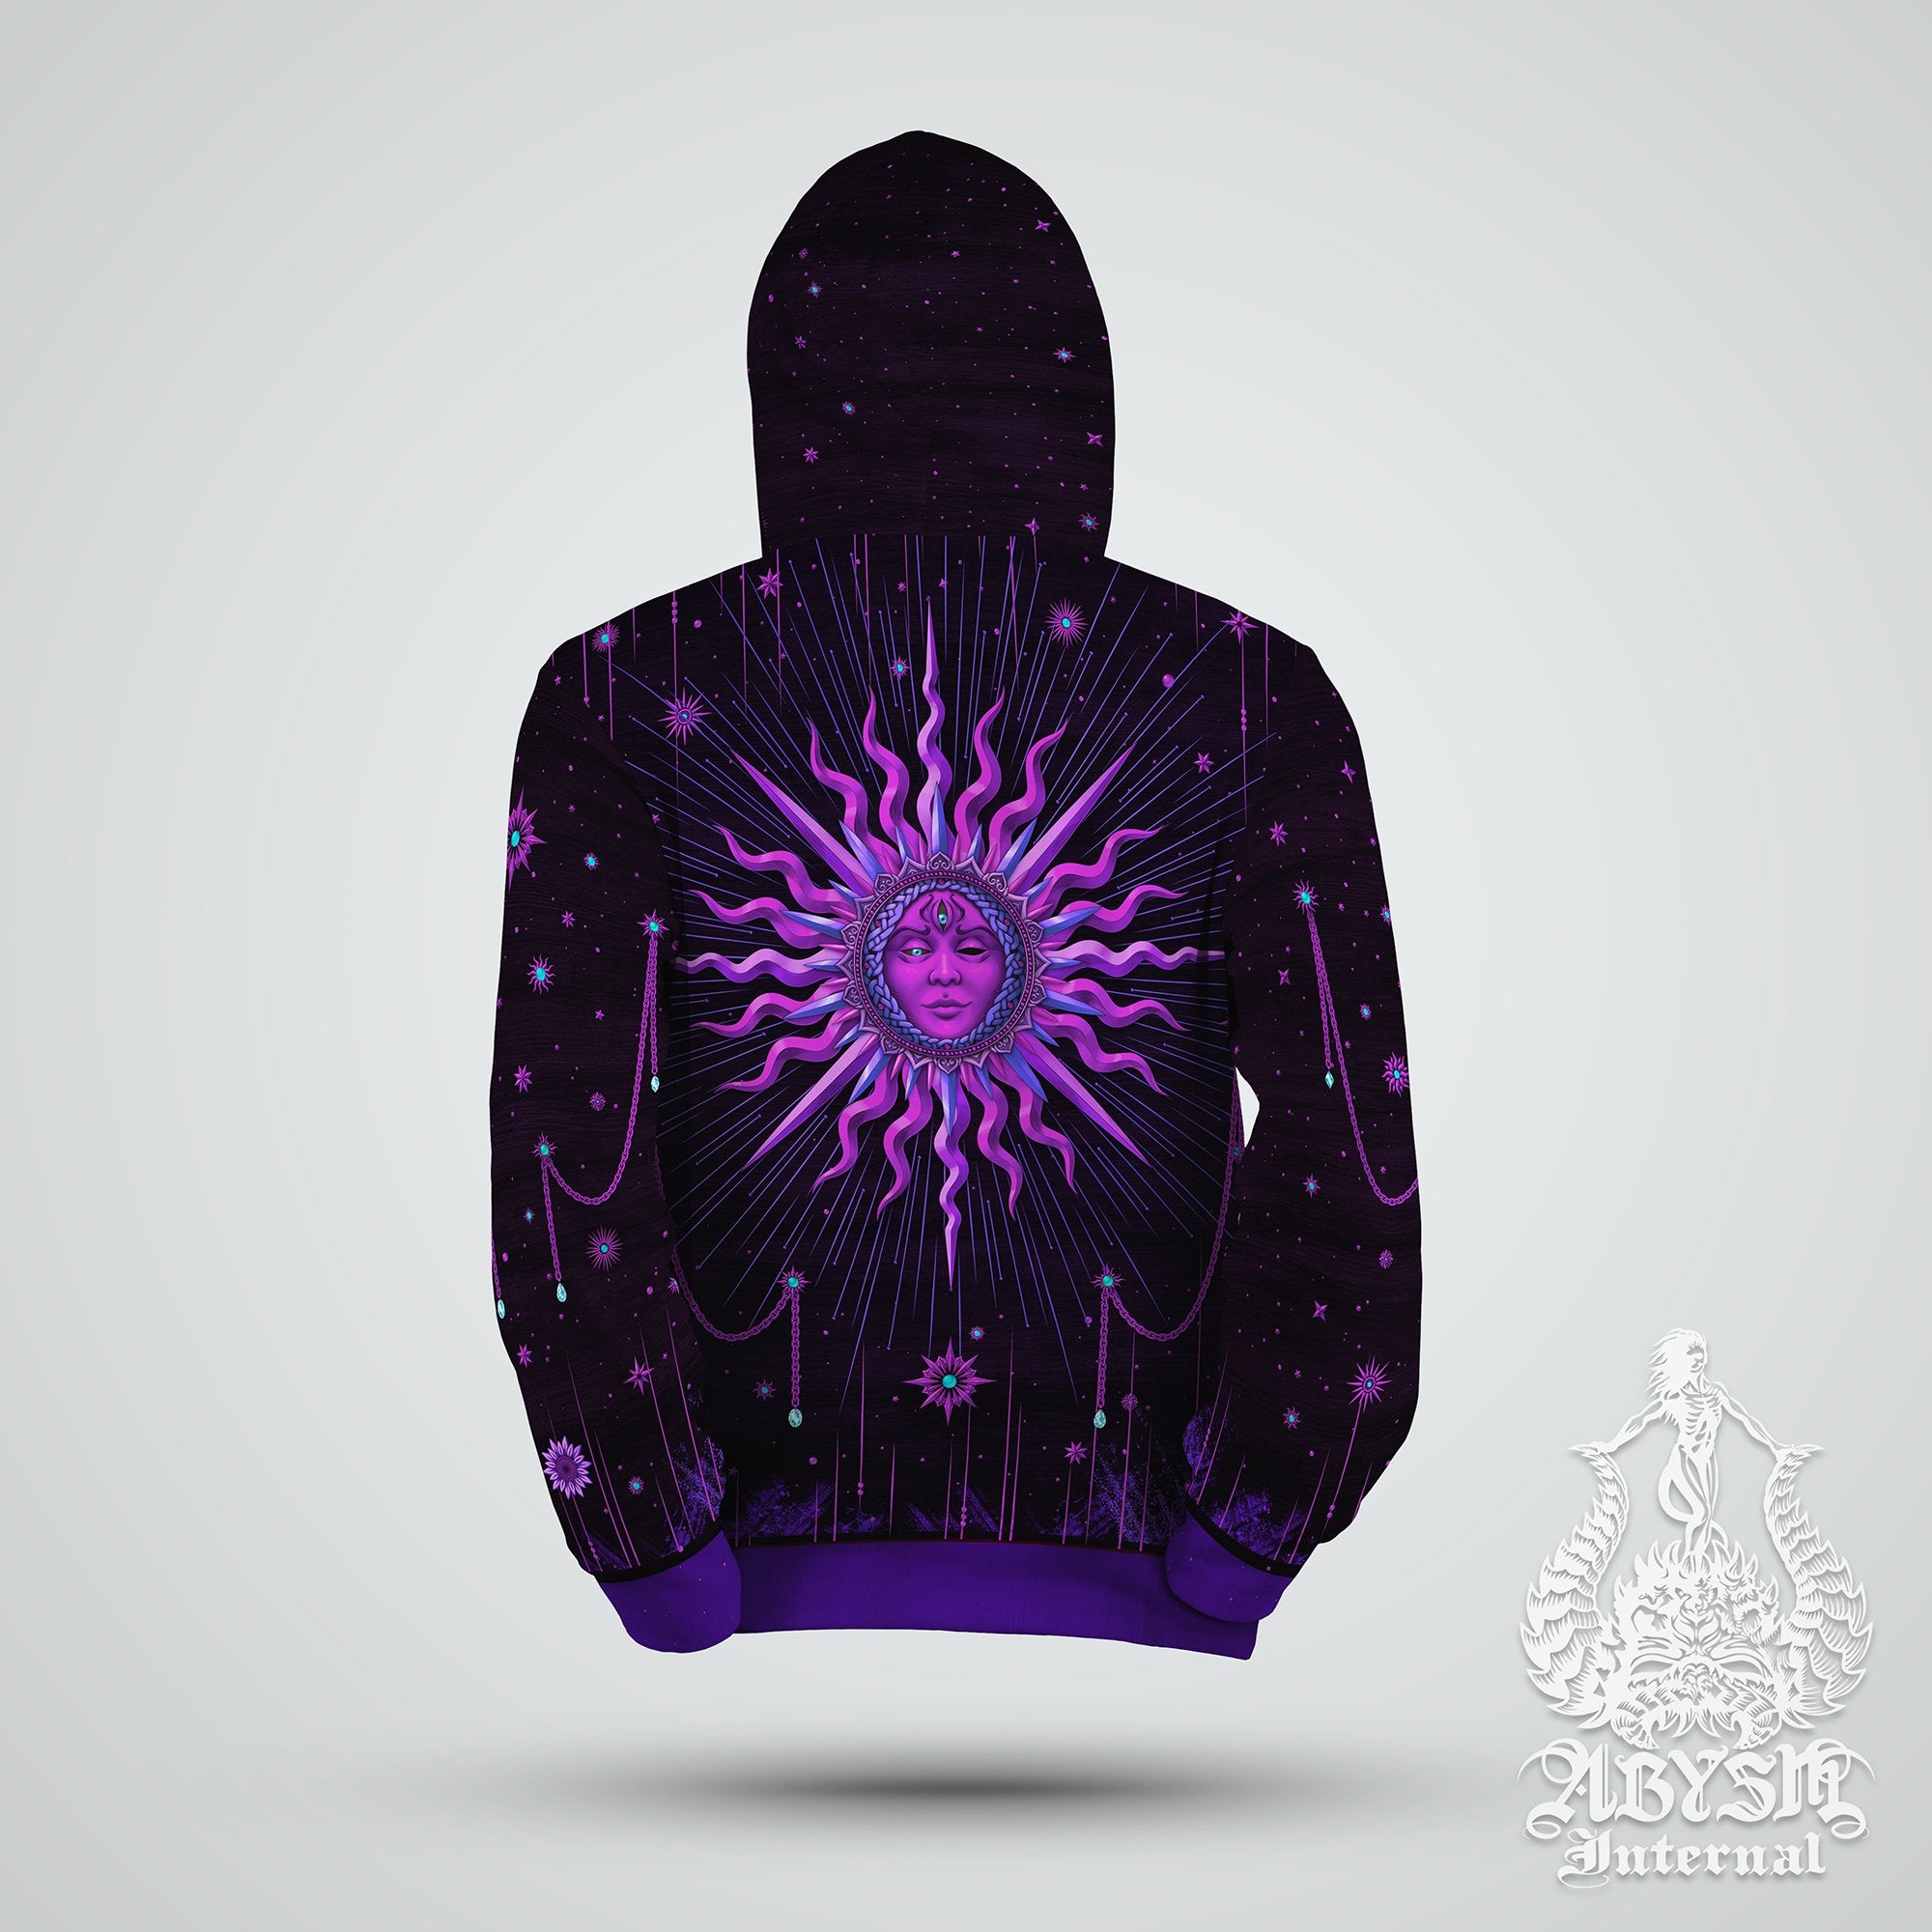 Whimsigoth Sun Hoodie, Witchy Party Outfit, Pastel Goth Sweater, Tarot Arcana, Purple Witch Pullover, Black Streetwear, Alternative Clothing, Unisex - Abysm Internal